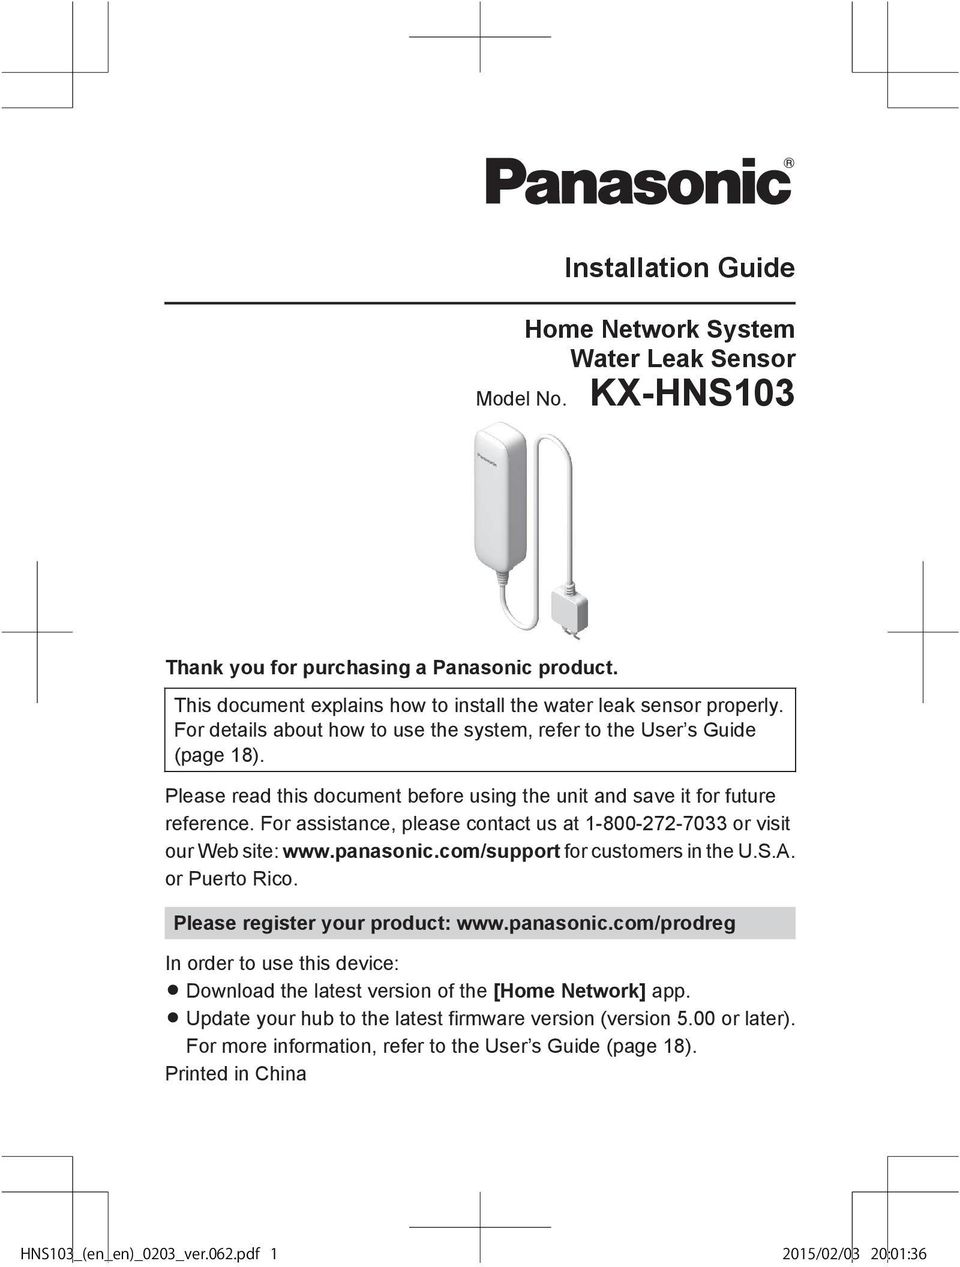 For assistance, please contact us at 1-800-272-7033 or visit our Web site: www.panasonic.com/support for customers in the U.S.A. or Puerto Rico. Please register your product: www.panasonic.com/prodreg In order to use this device: R Download the latest version of the [Home Network] app.